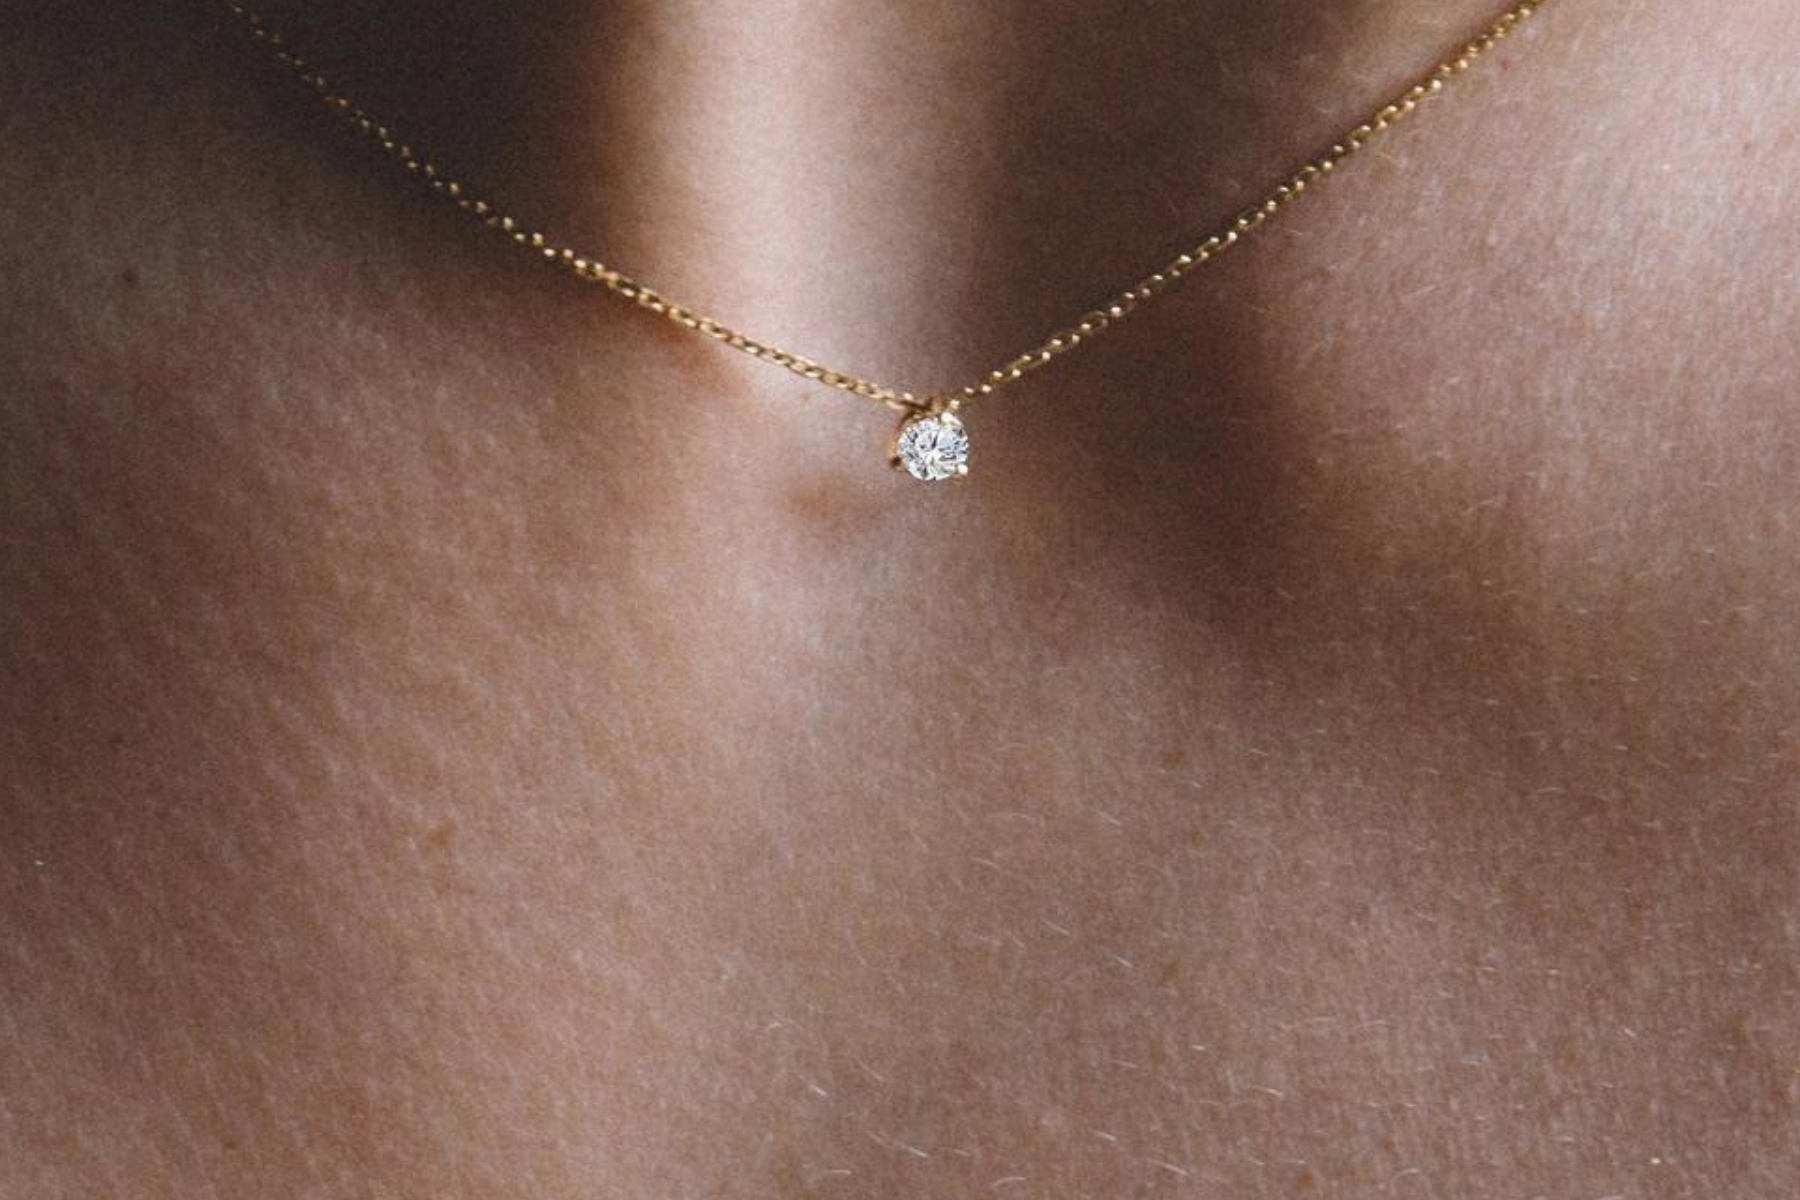 A black woman is dressed in a diamond pendant necklace